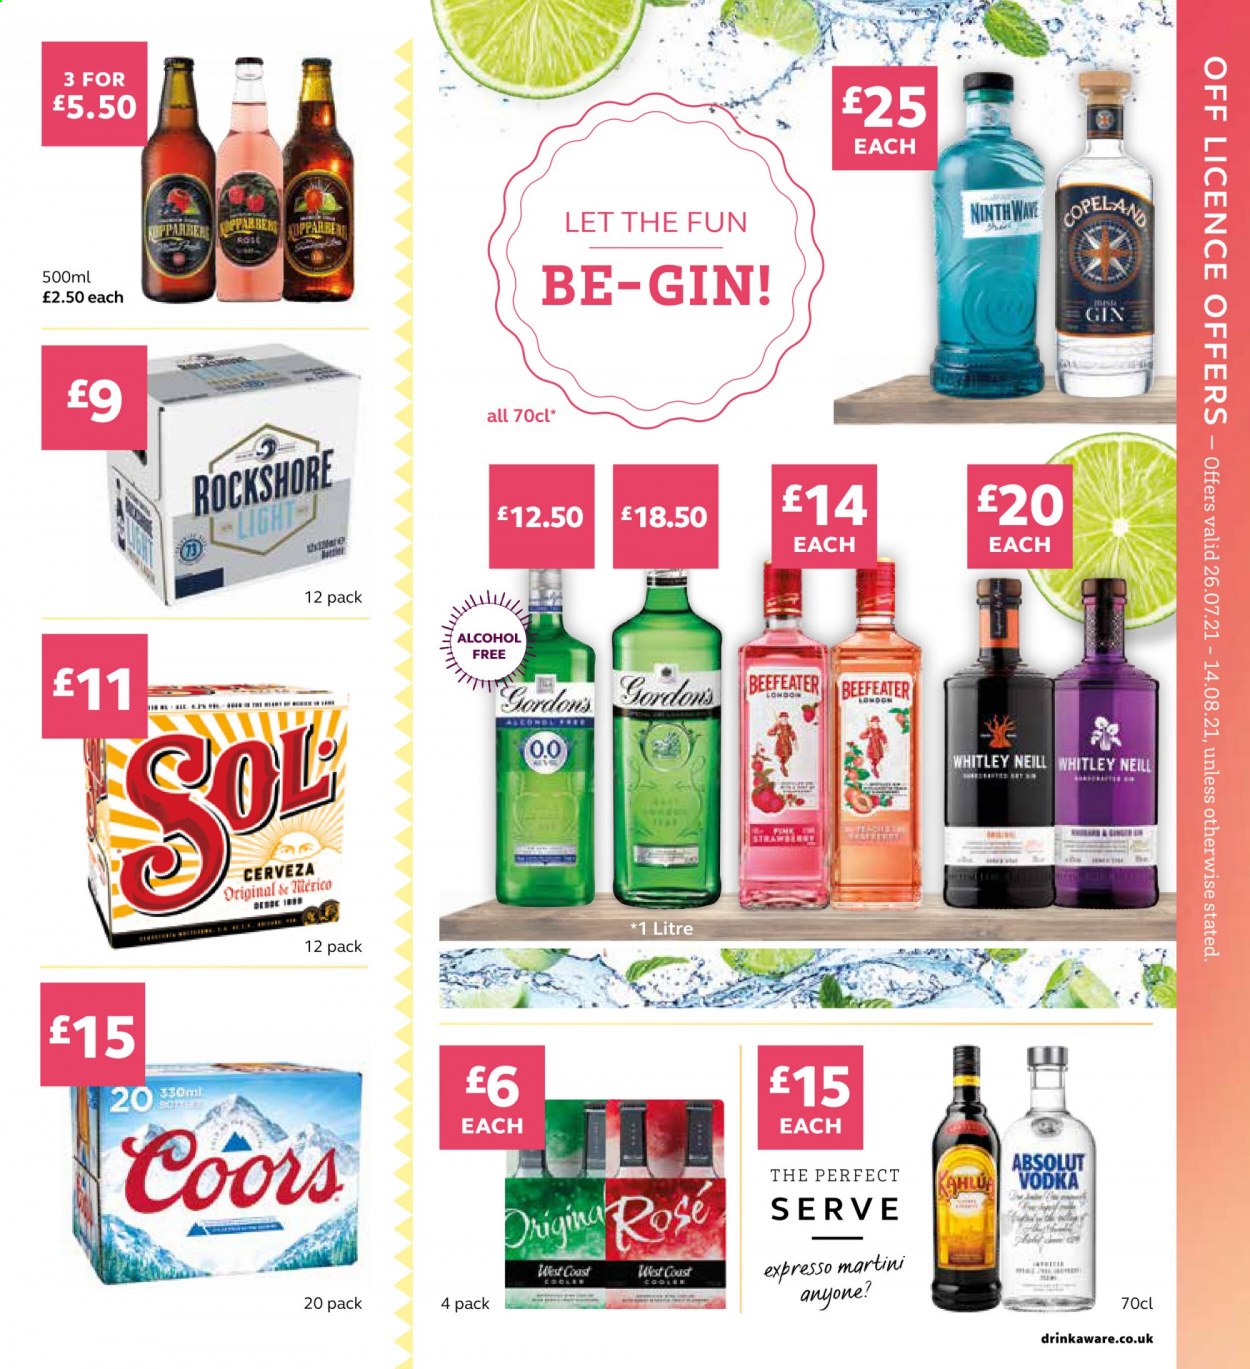 thumbnail - SuperValu offer  - 26/07/2021 - 14/08/2021 - Sales products - Coors, beer, Rockshore, wine, rosé wine, gin, vodka, Gordon's, Absolut, Beefeater, Martini. Page 15.